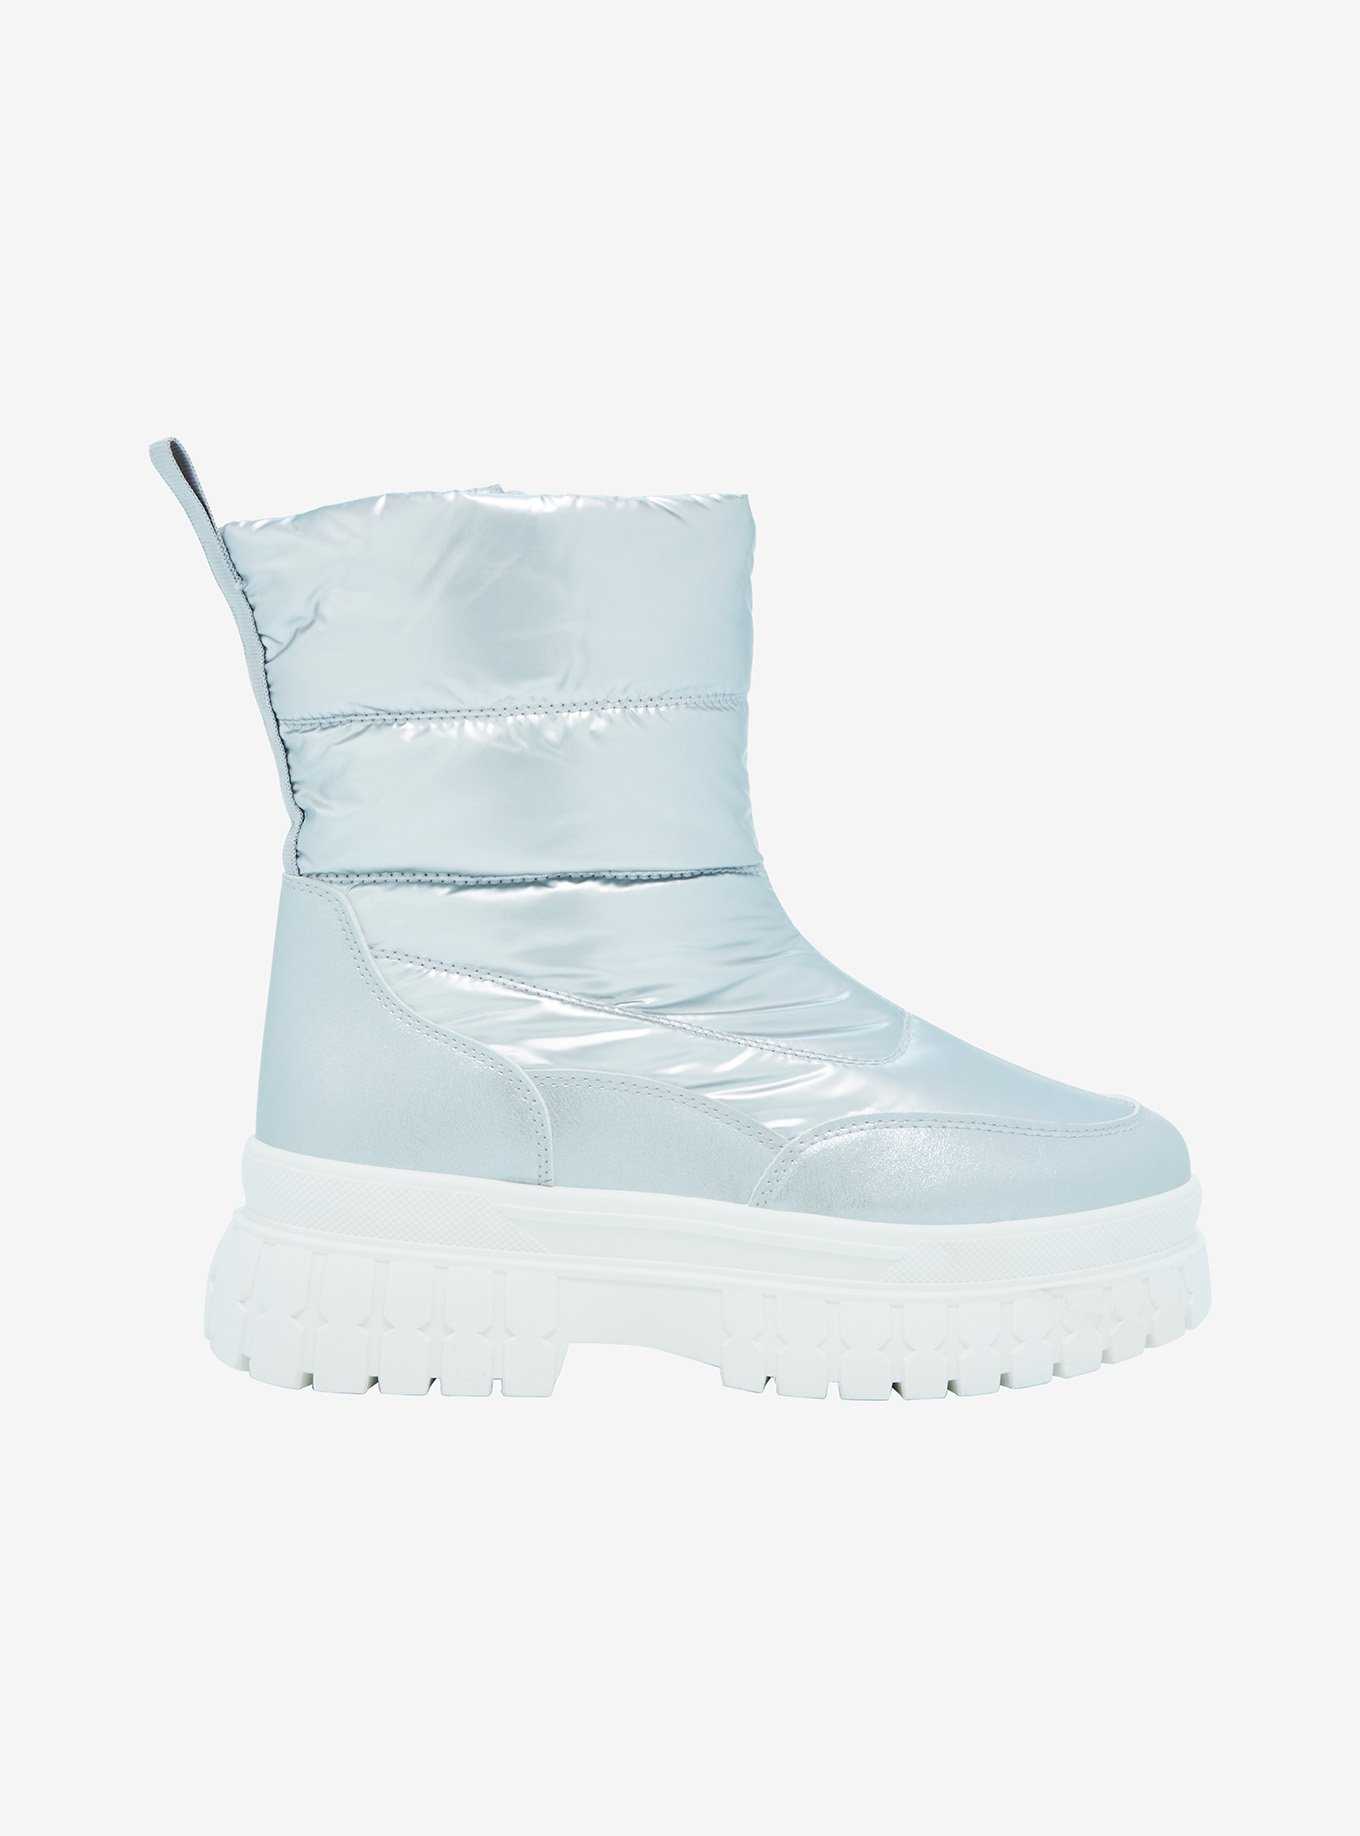 Dirty Laundry Chrome Puffer Boots, , hi-res